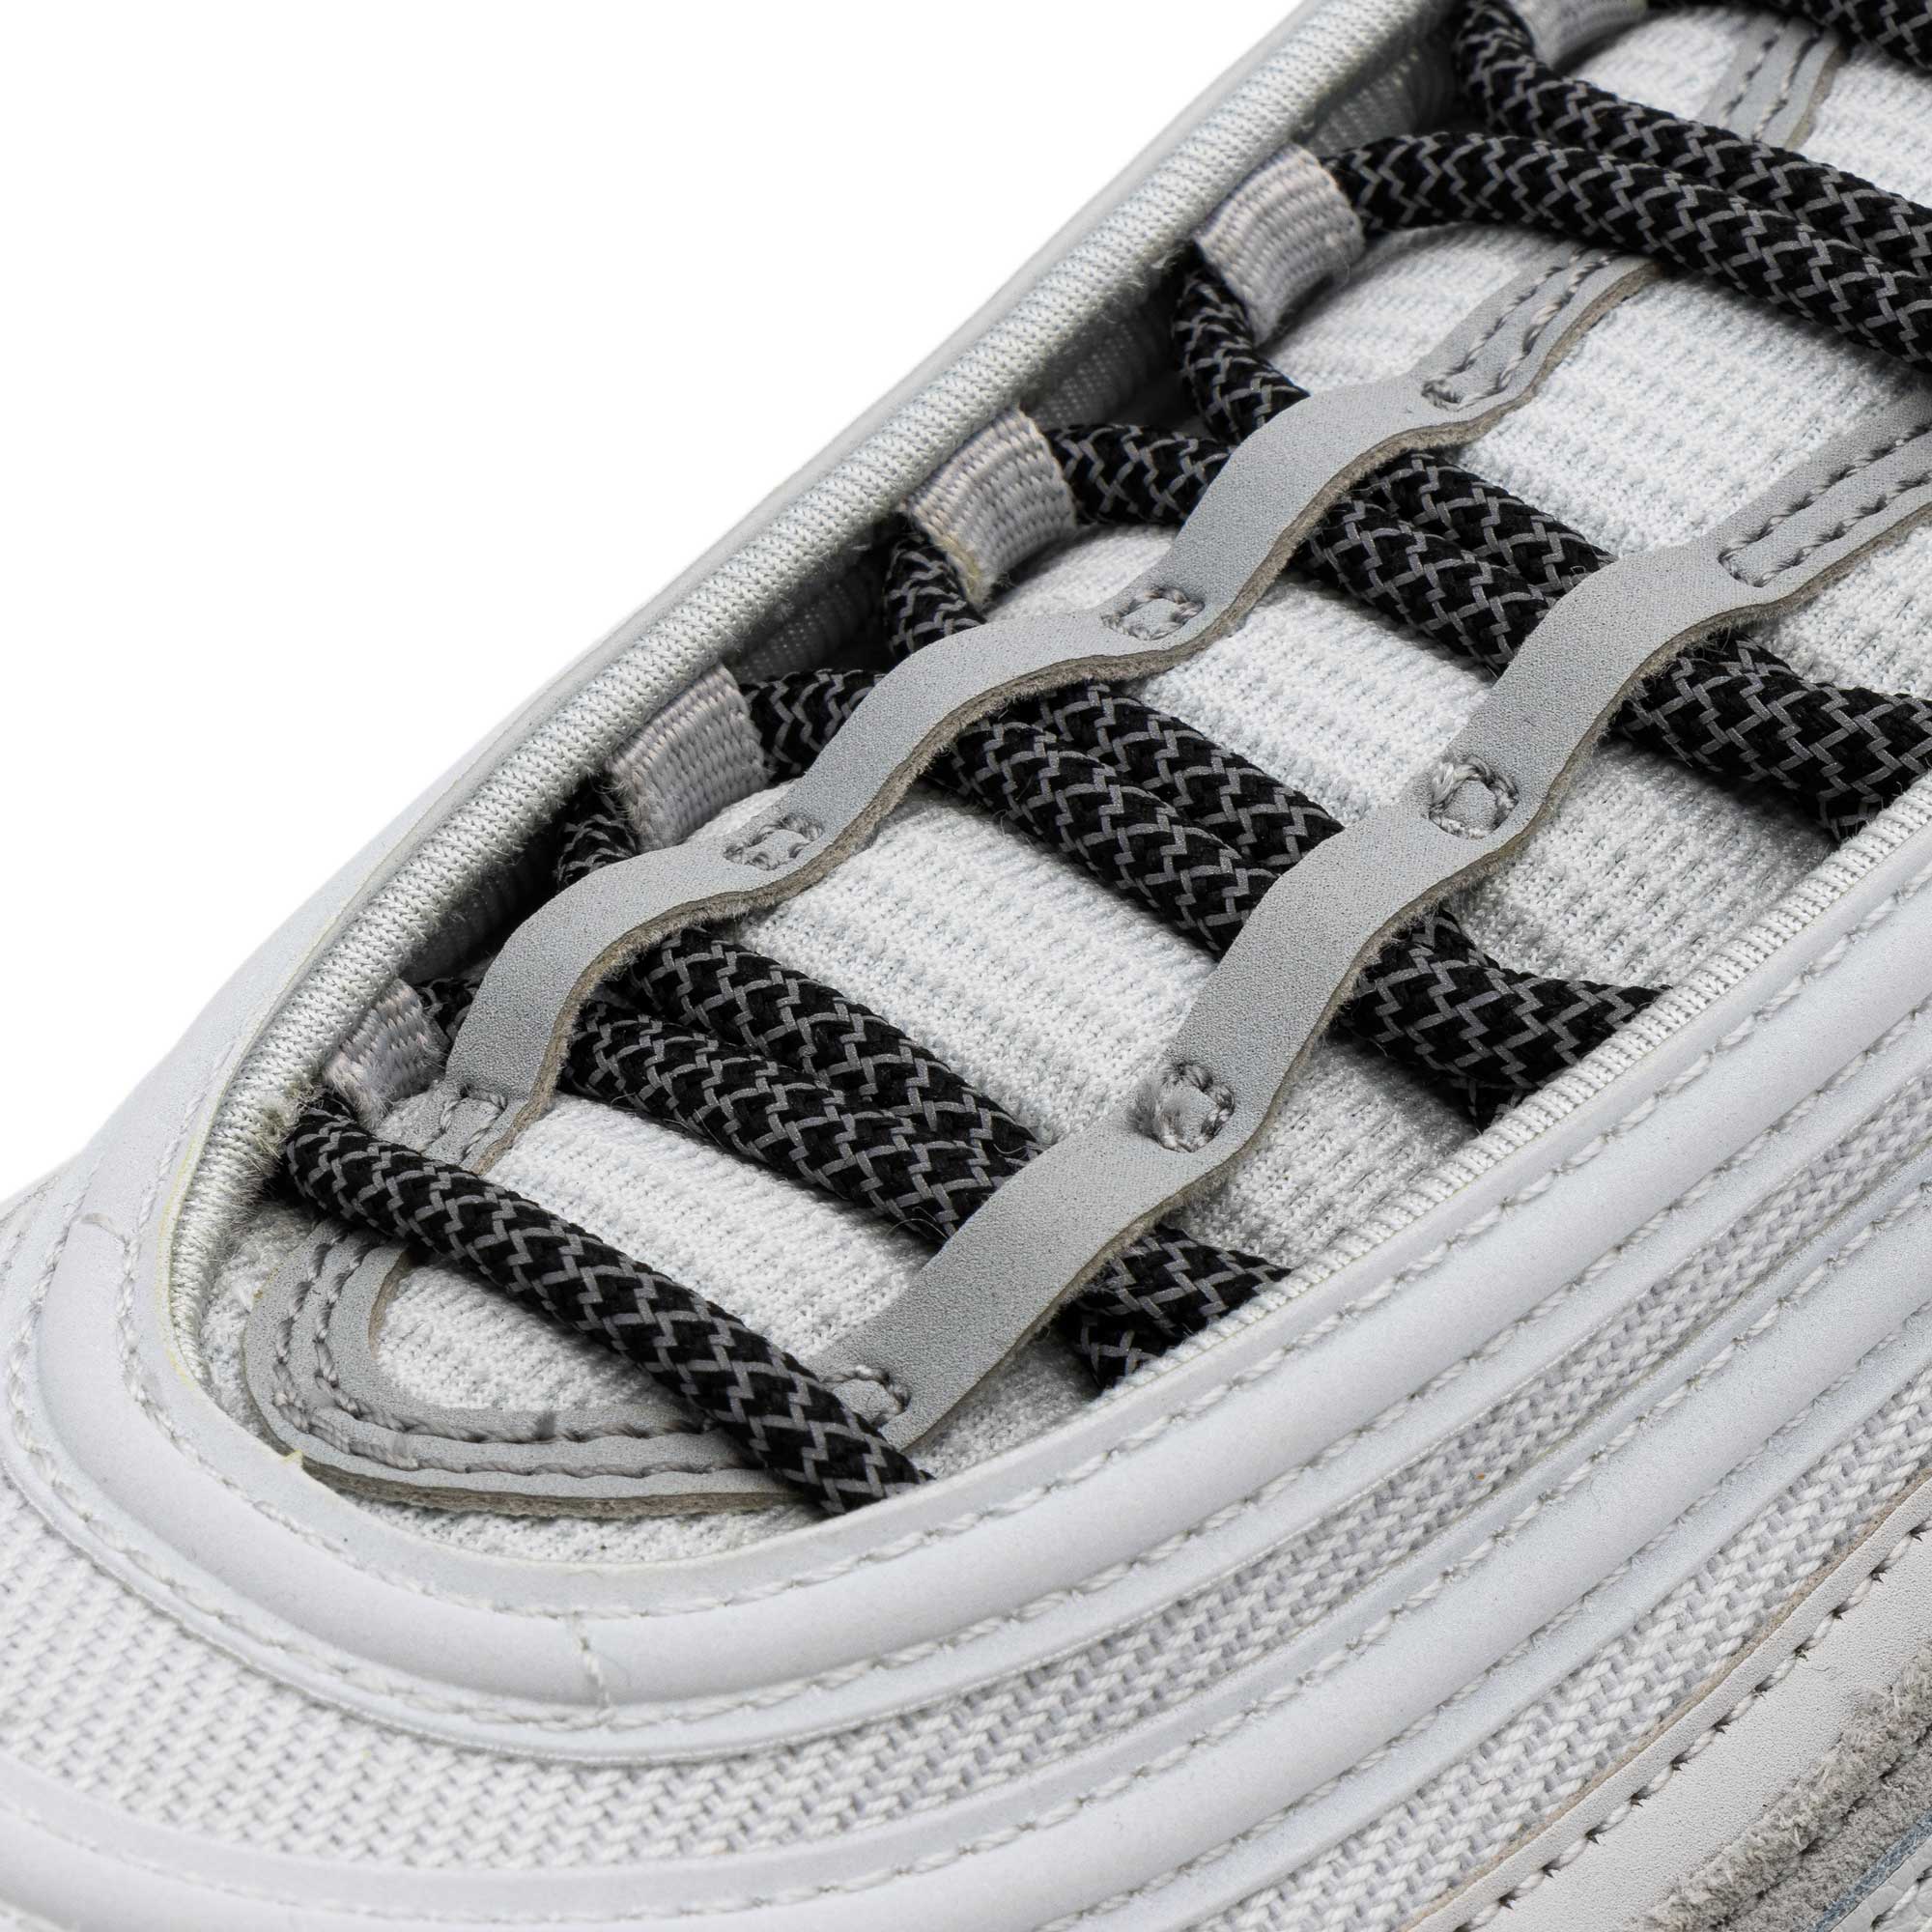 Flat Shoe Laces for Sneakers, Gingham Plaid Shoelaces (52 In, 6 Pairs) -  Zodaca